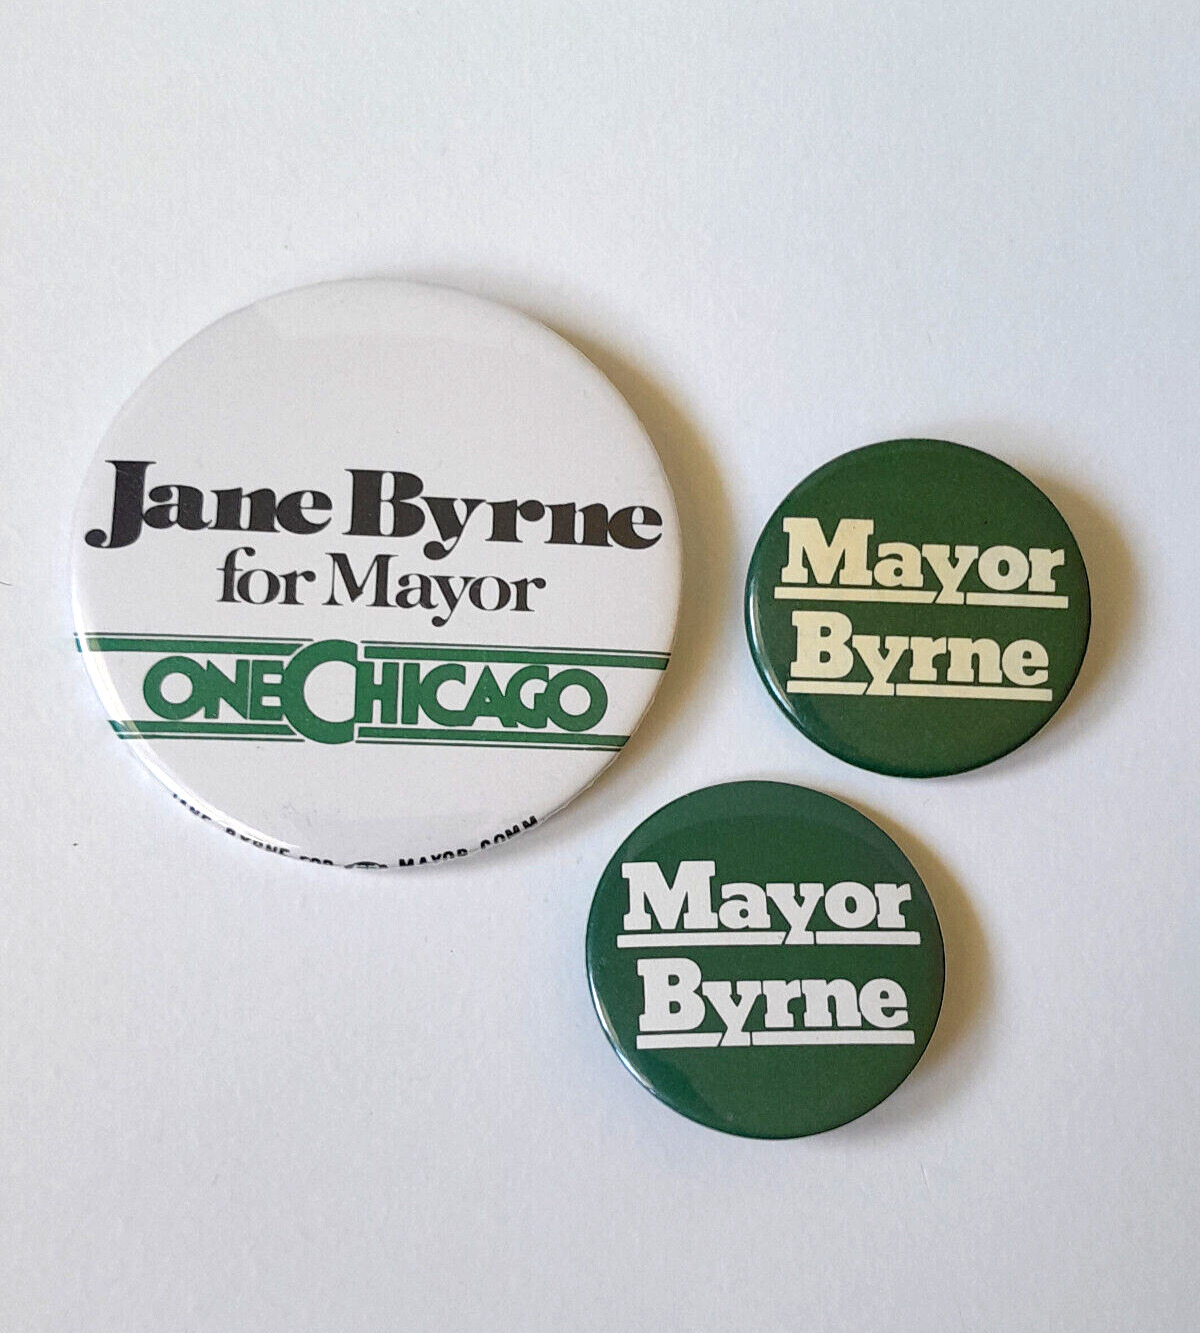 JANE BYRNE Chicago Mayor 1980s Election Campaign Democrat Pinback Buttons Pins